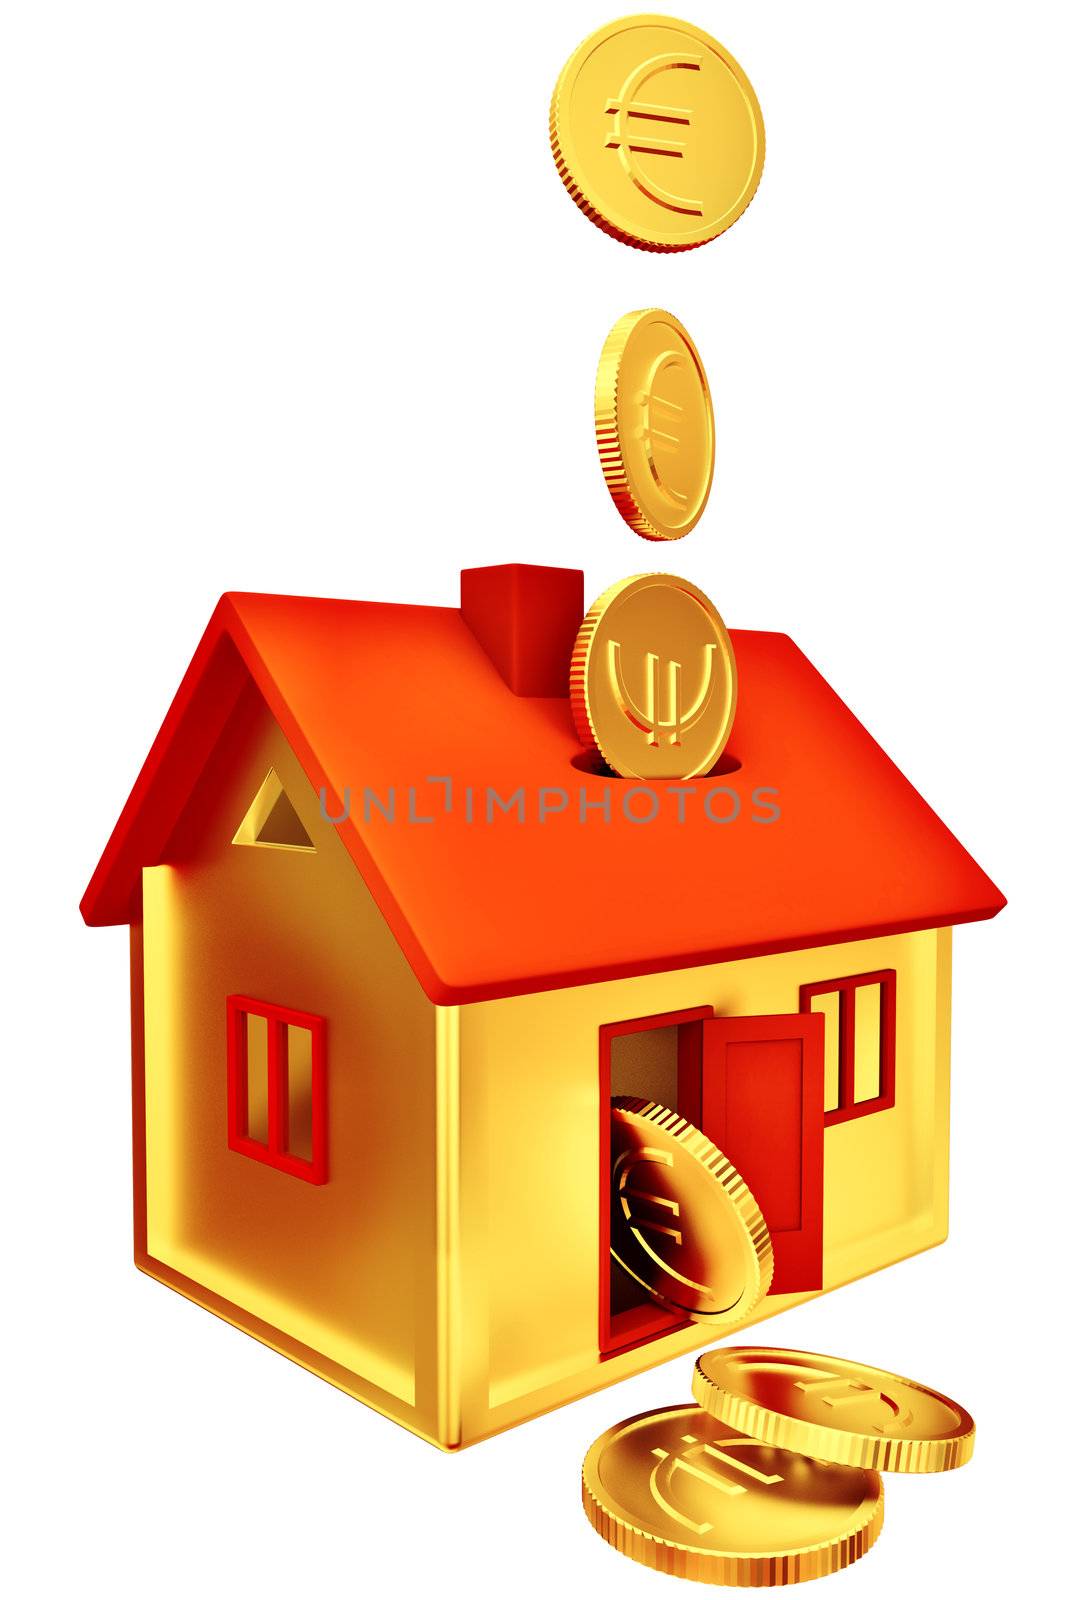 euro coins falling down into a piggy-bank in the form of a gilded house as a symbol of the accumulation